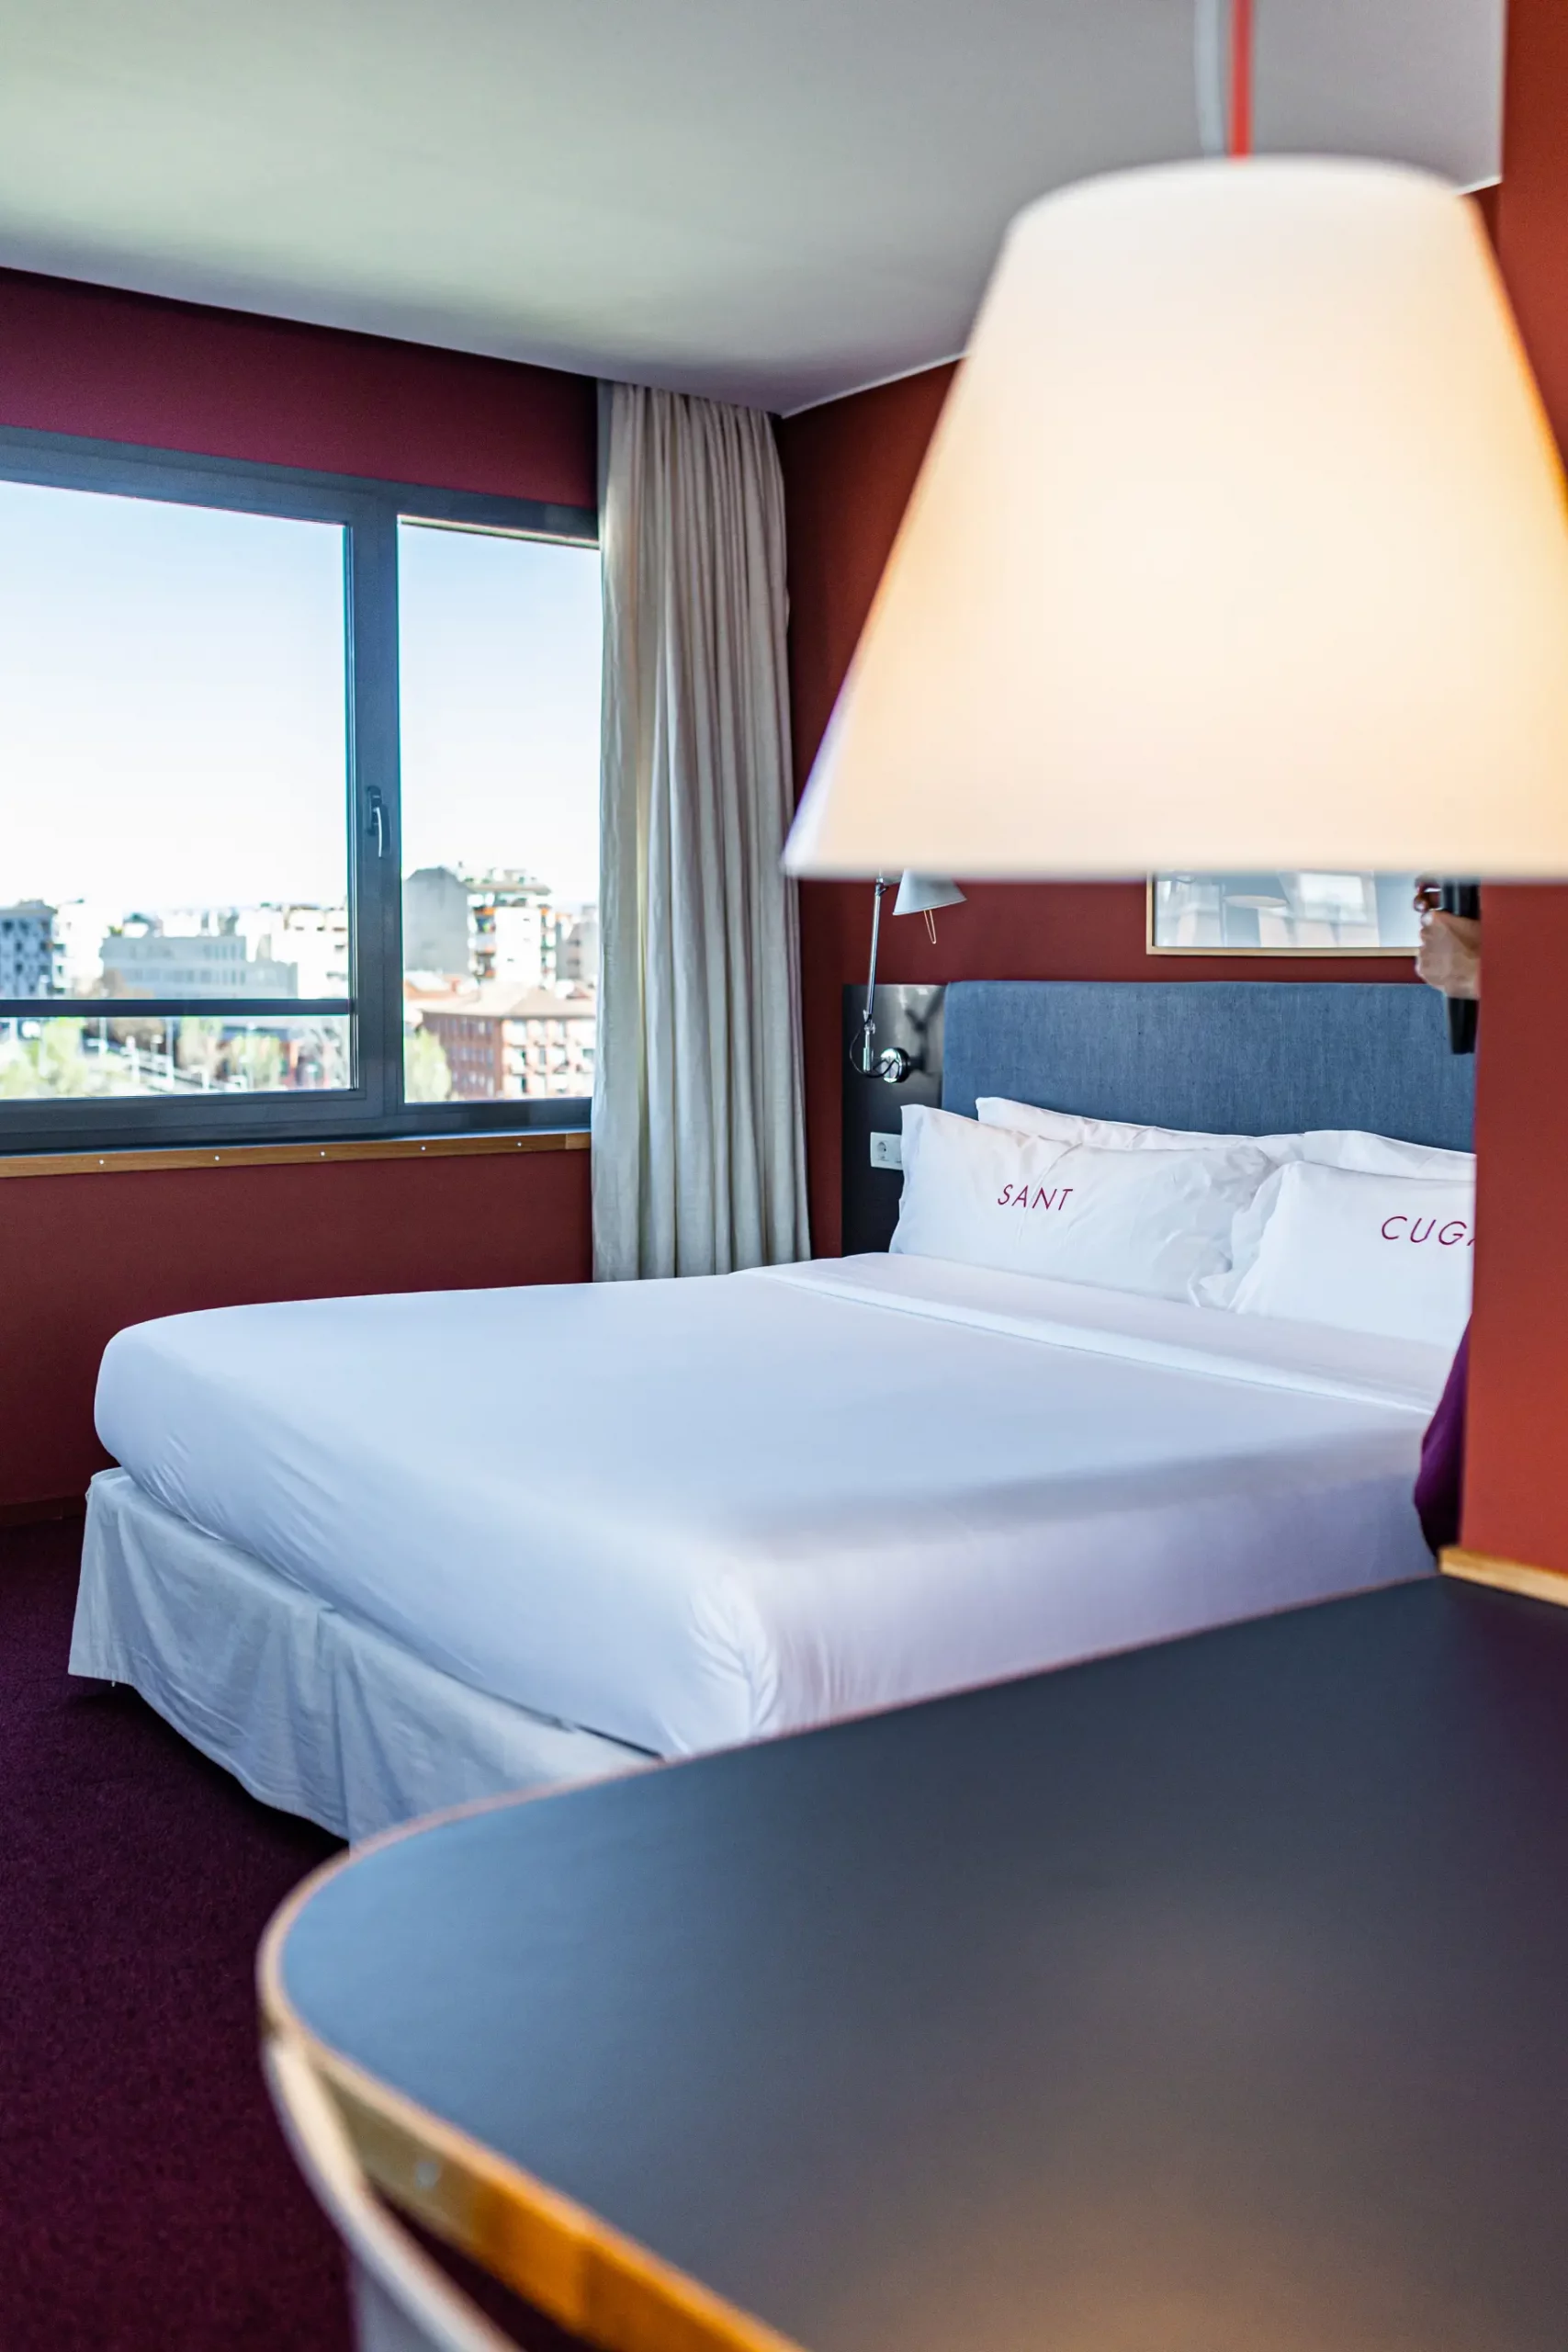 Sant Cugat Hotel room while you stay in Facialteam Barcelona